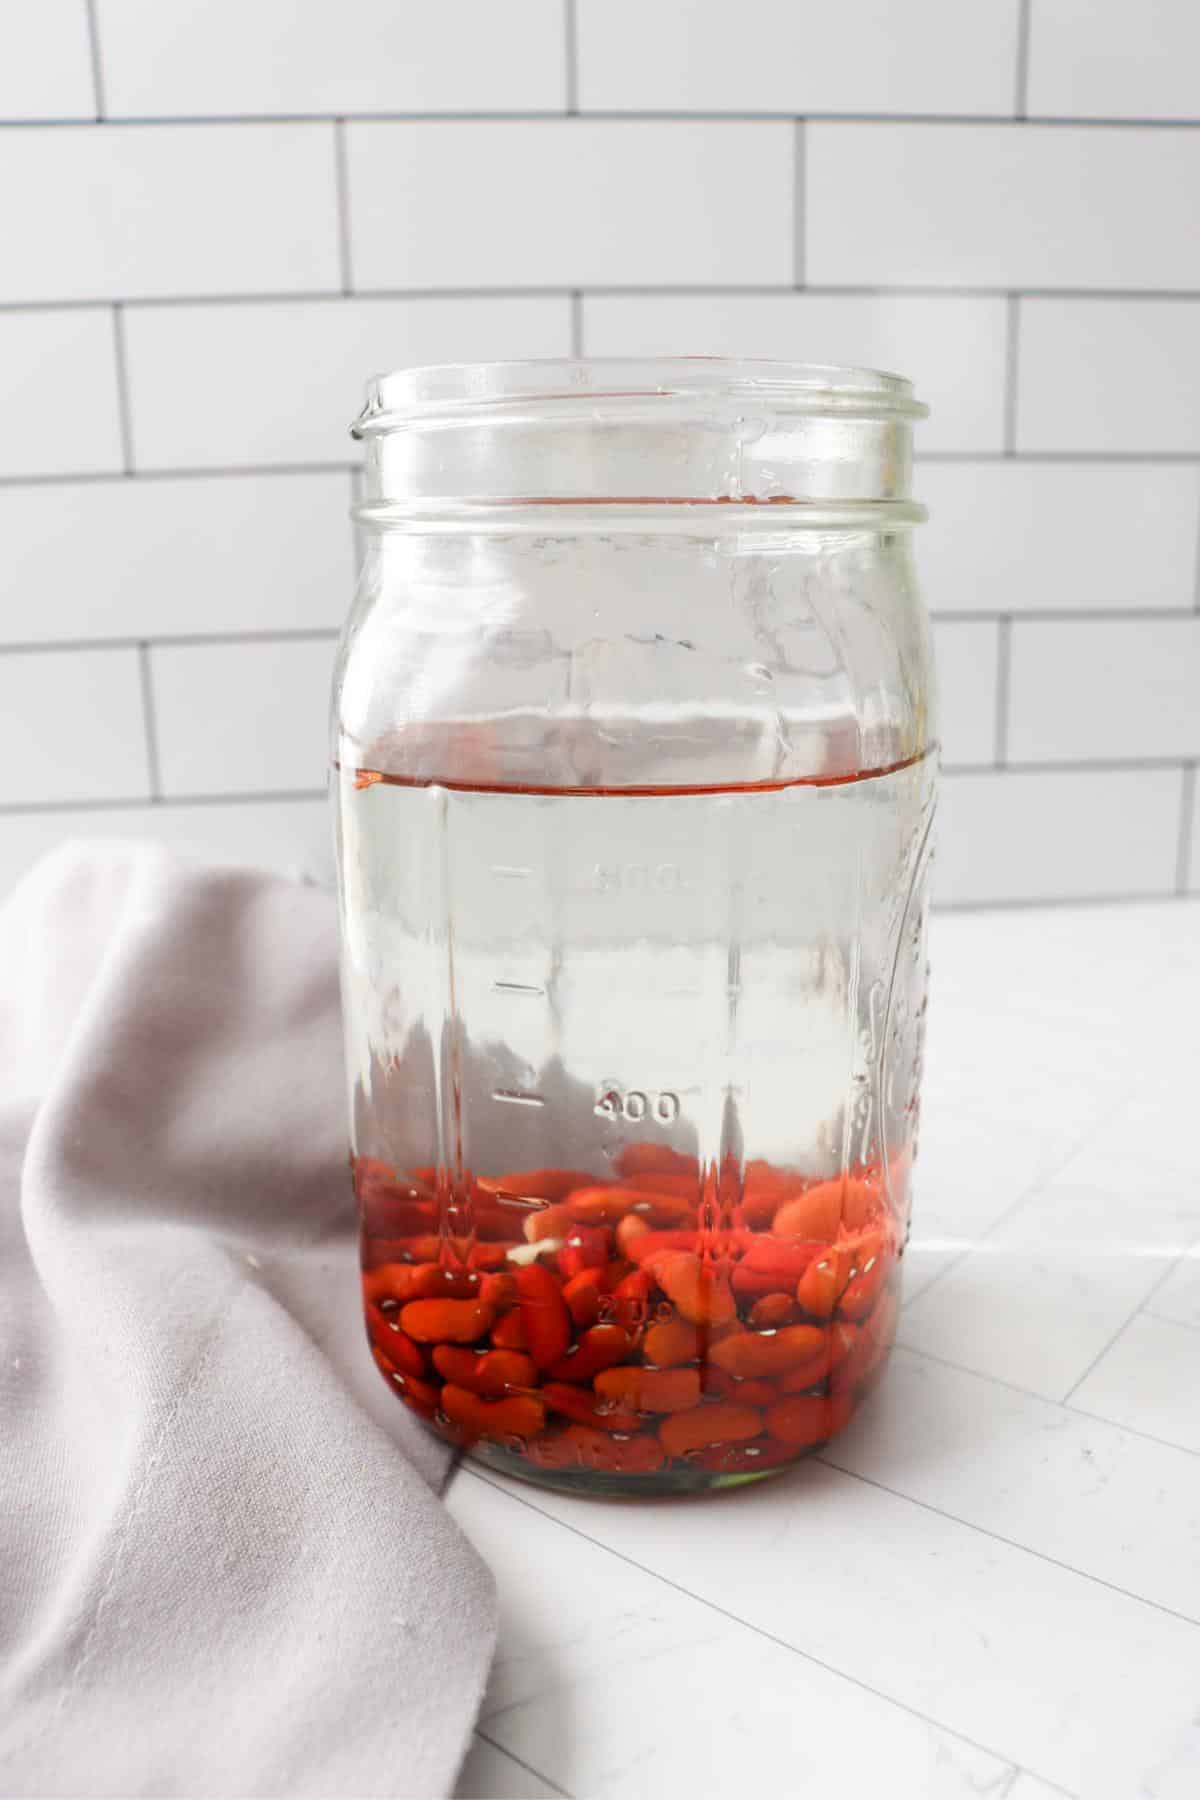 Dry kidney beans soaking in a mason jar of water.